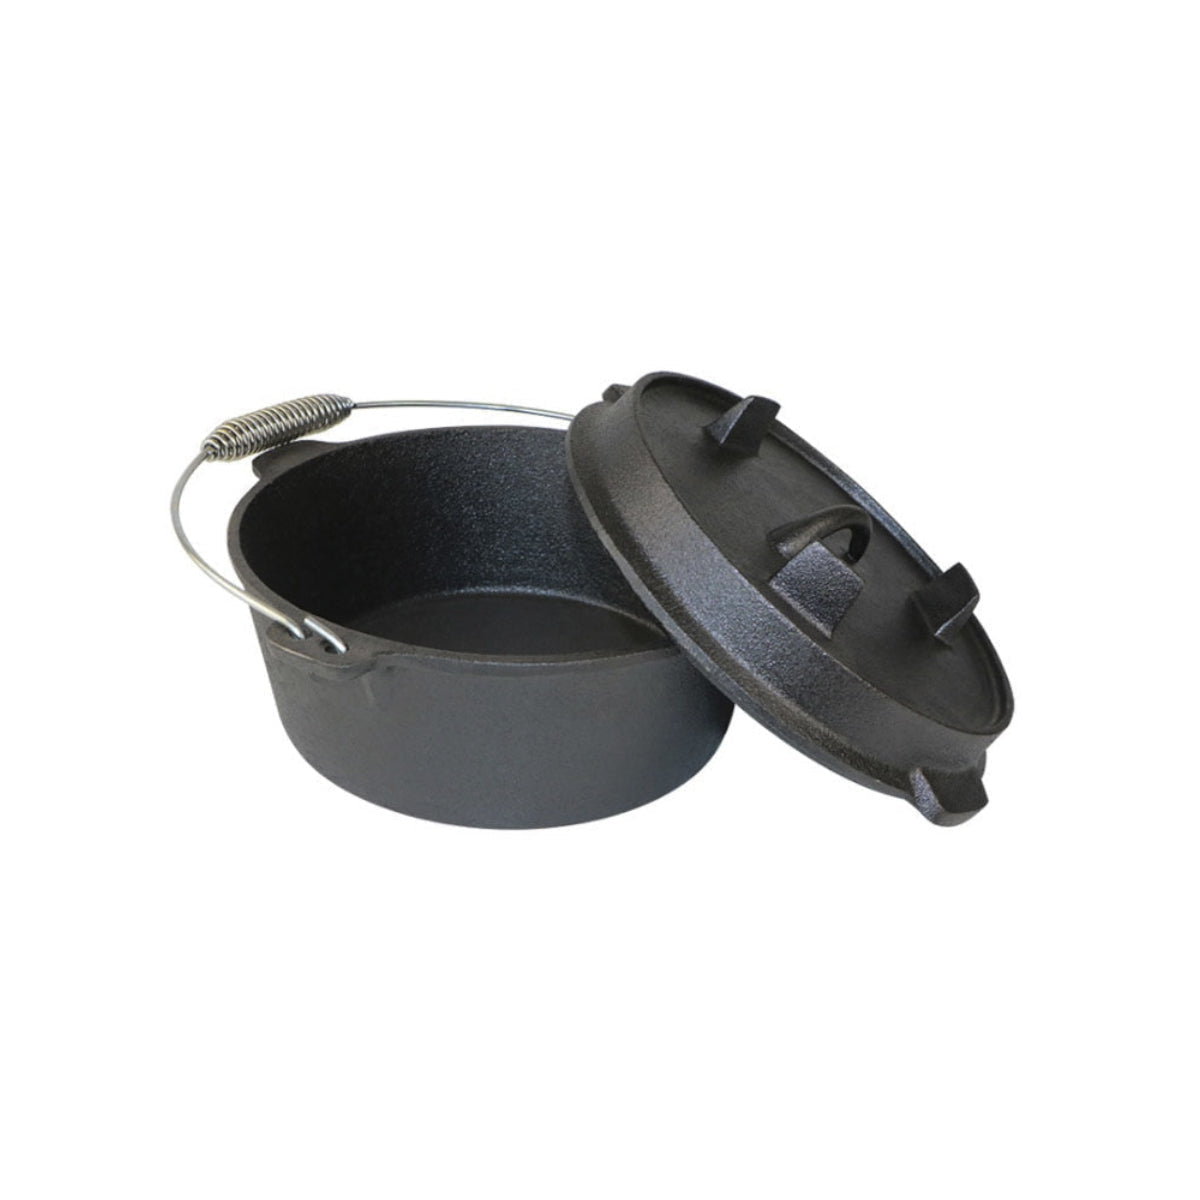 Outdoor And Camping Dutch Oven